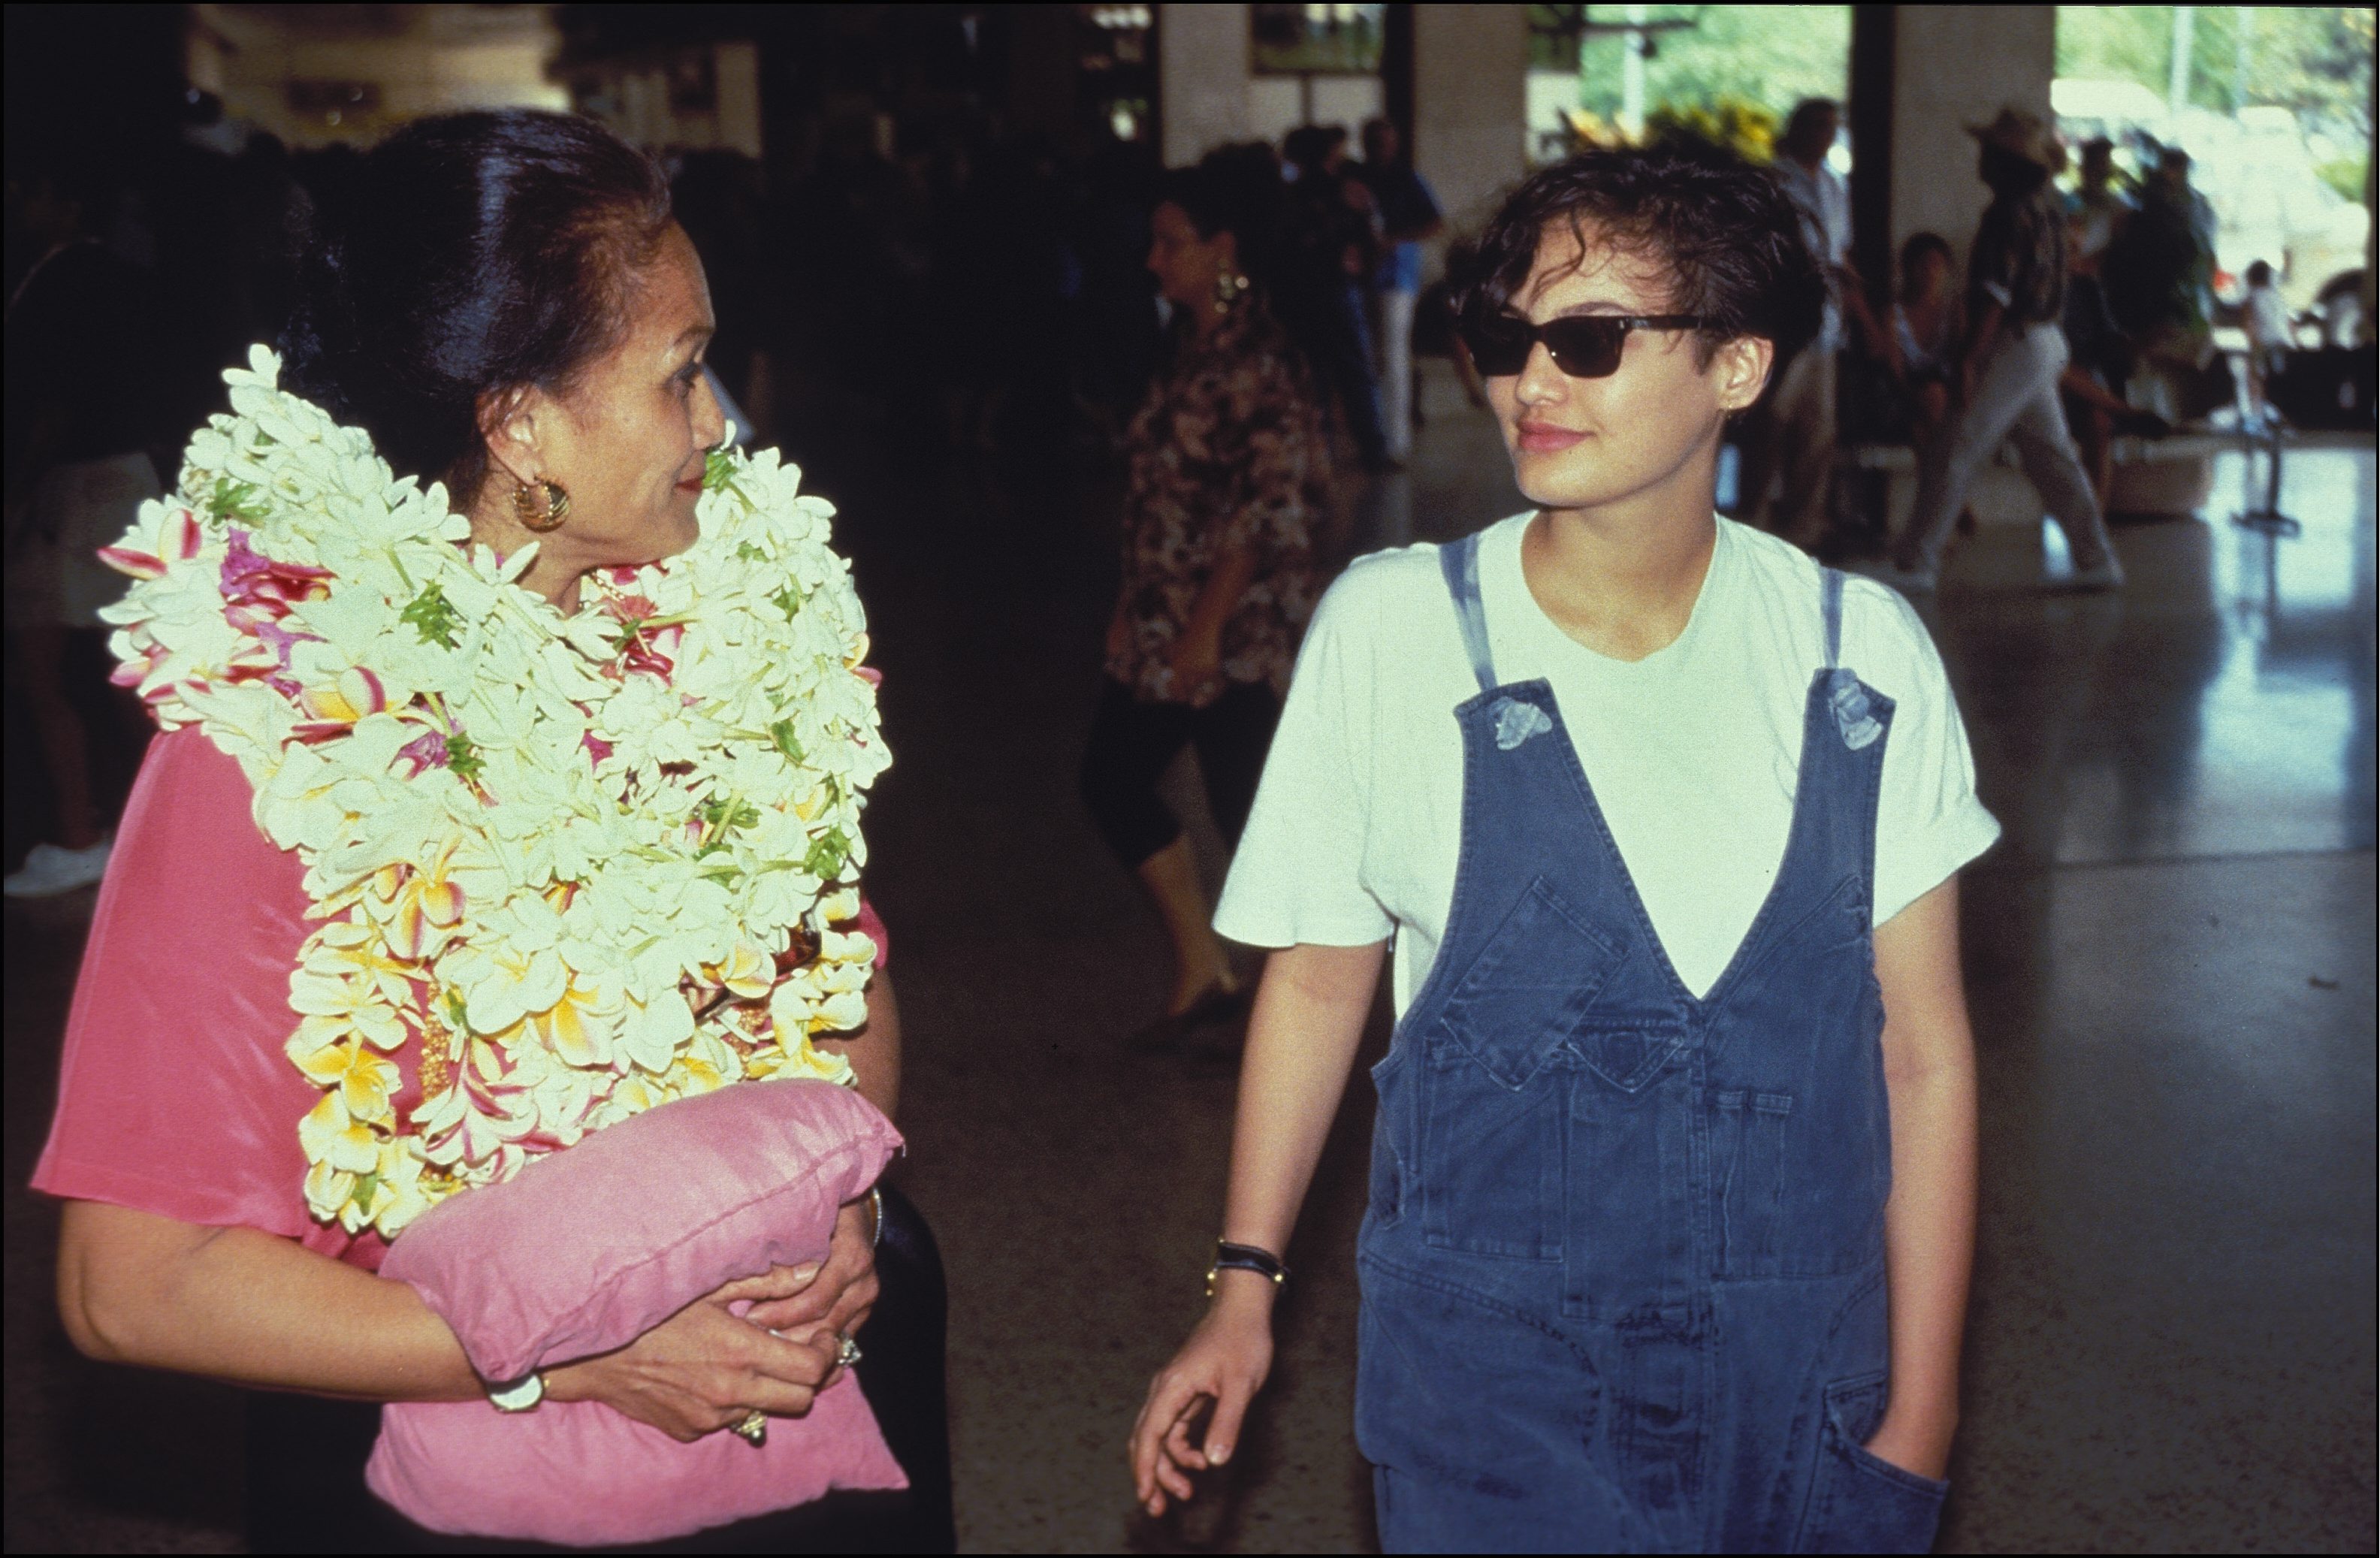 Cheyenne Brando walking with her mother Tarita Teriipaia | Source: Getty Images